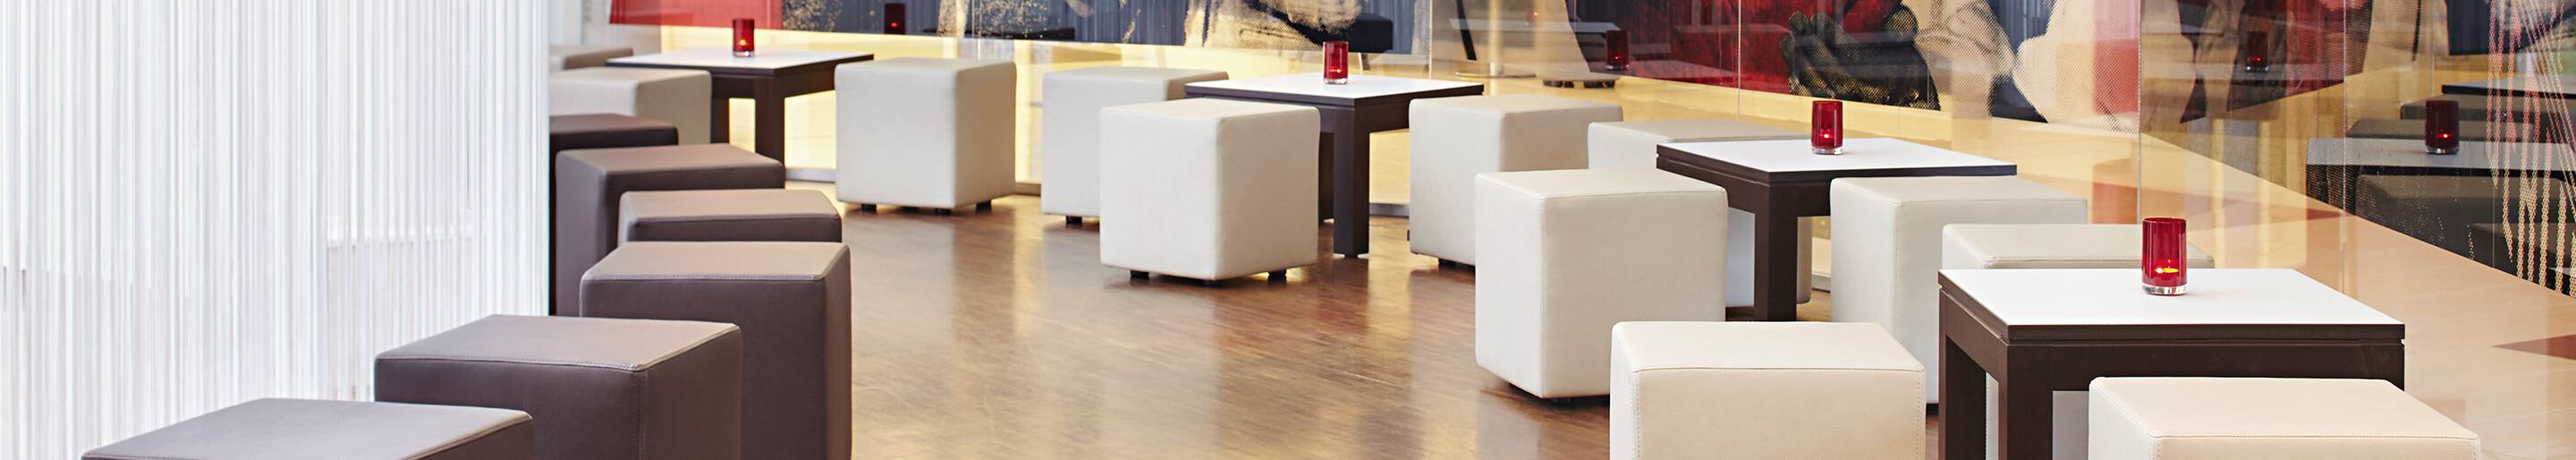 Indoor Sofa Tables for your restaurant or hotel